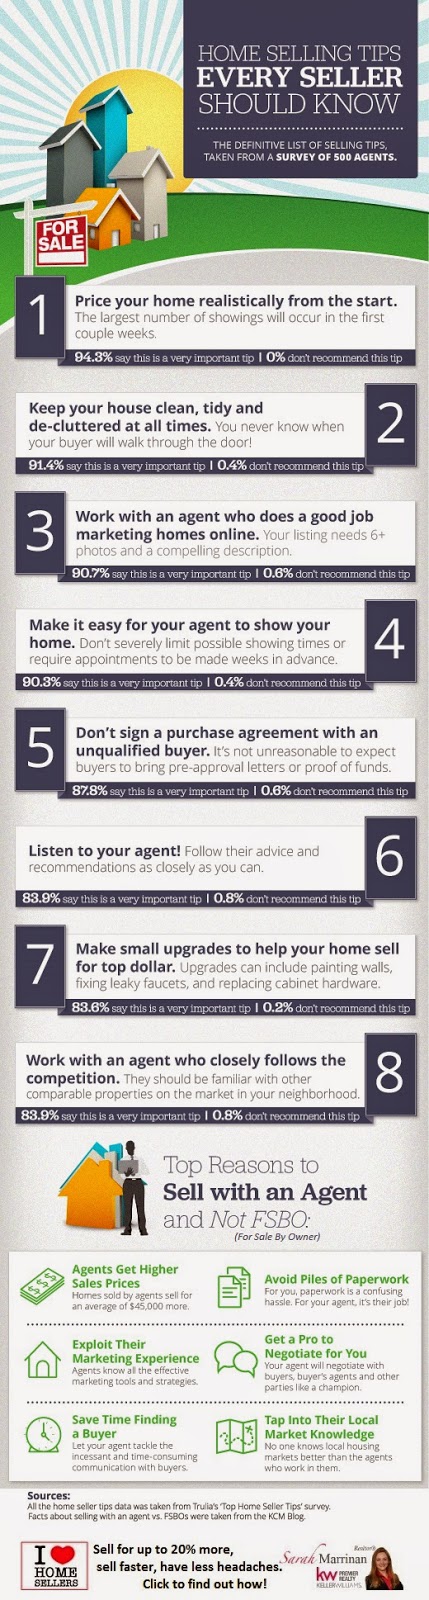 What home selling tips are the most important for Hugo home sellers to know? 